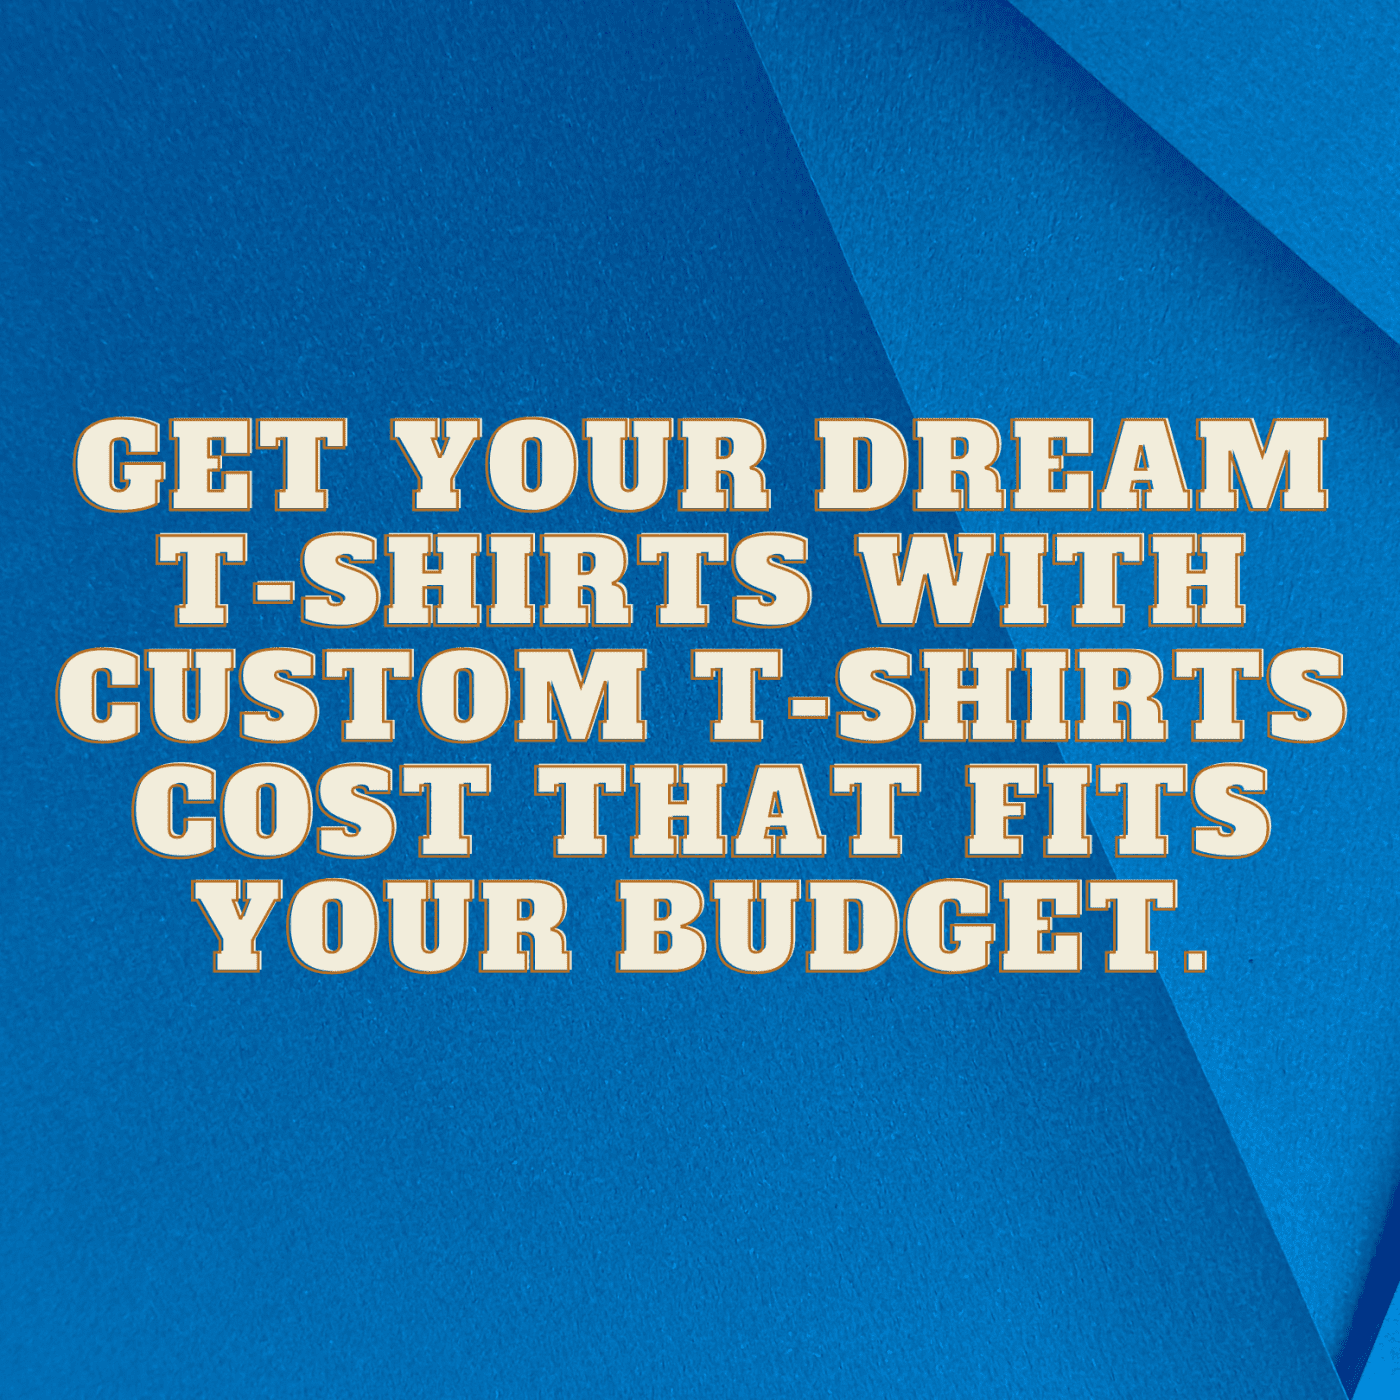 custom t shirts cost, Get-Your-Dream-T-Shirts-with-Custom-T-Shirts-Cost-That-Fits-Your-Budget.